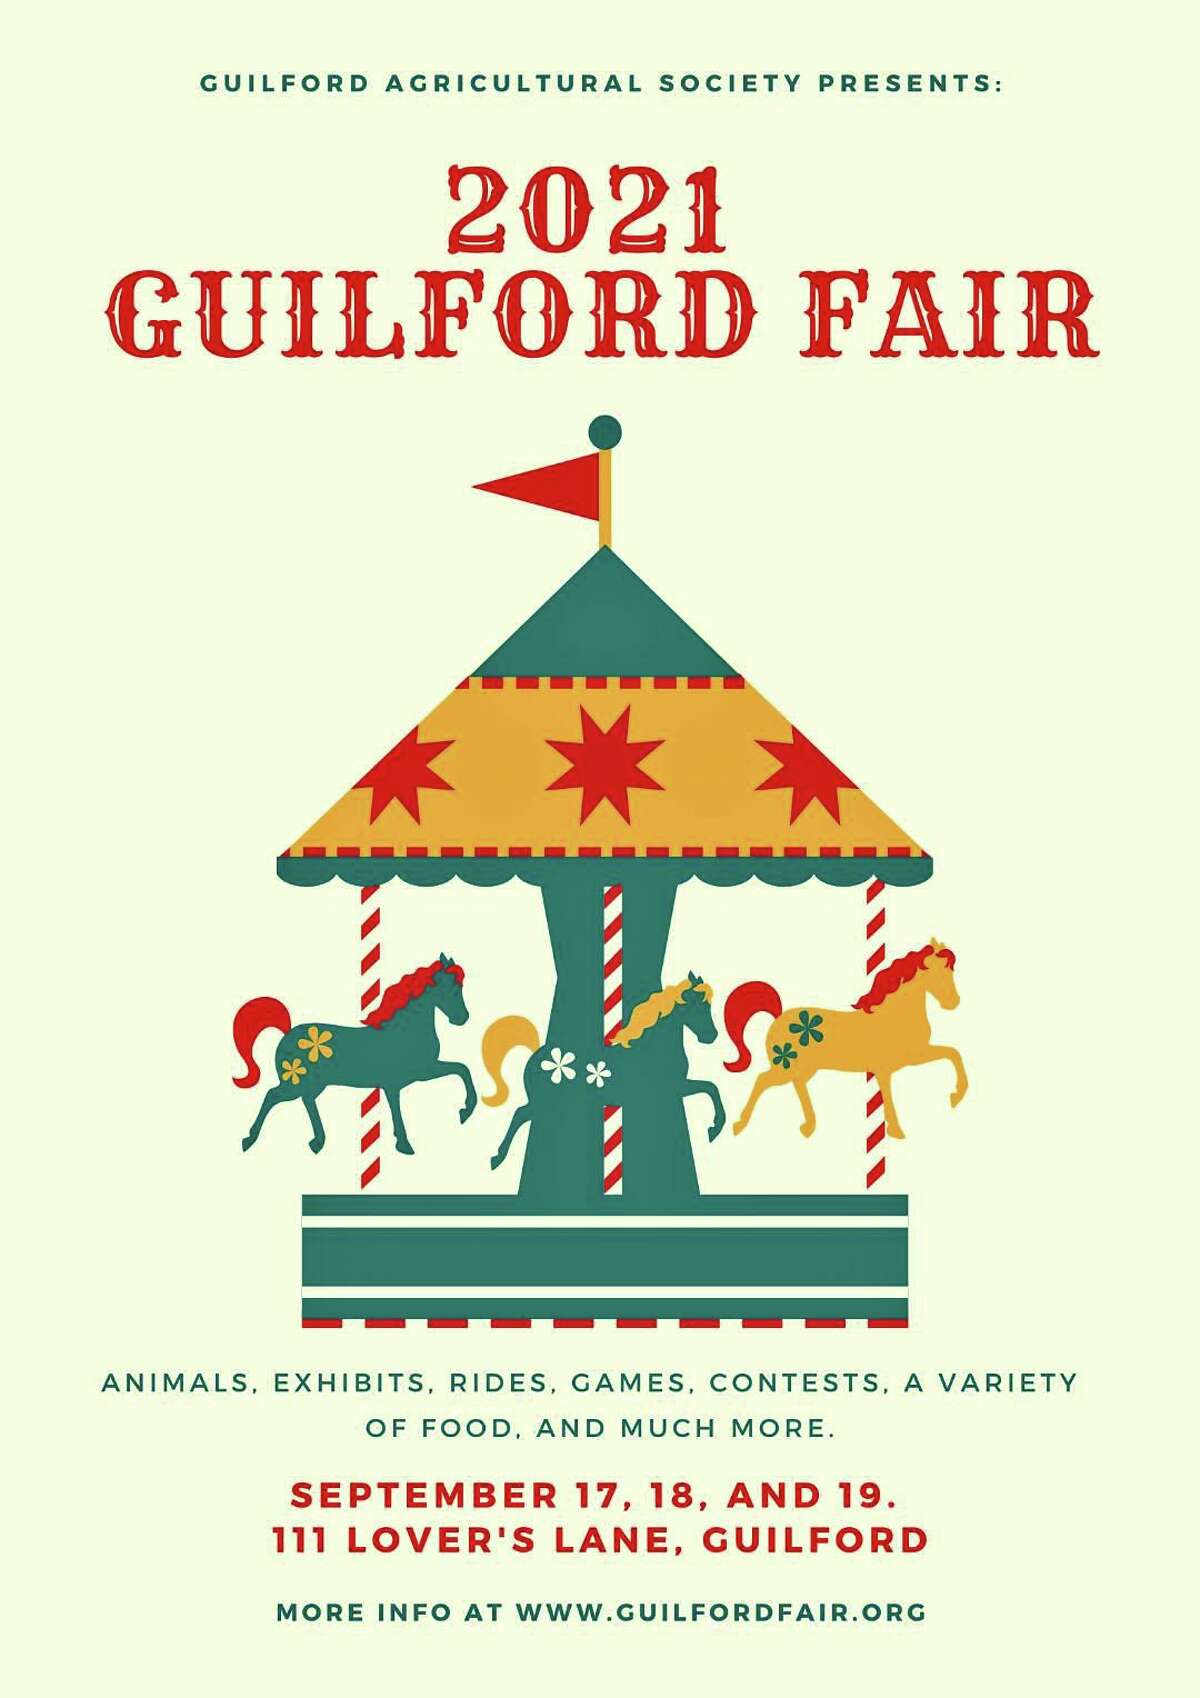 Get your entries ready, the Guilford Fair is returning this year